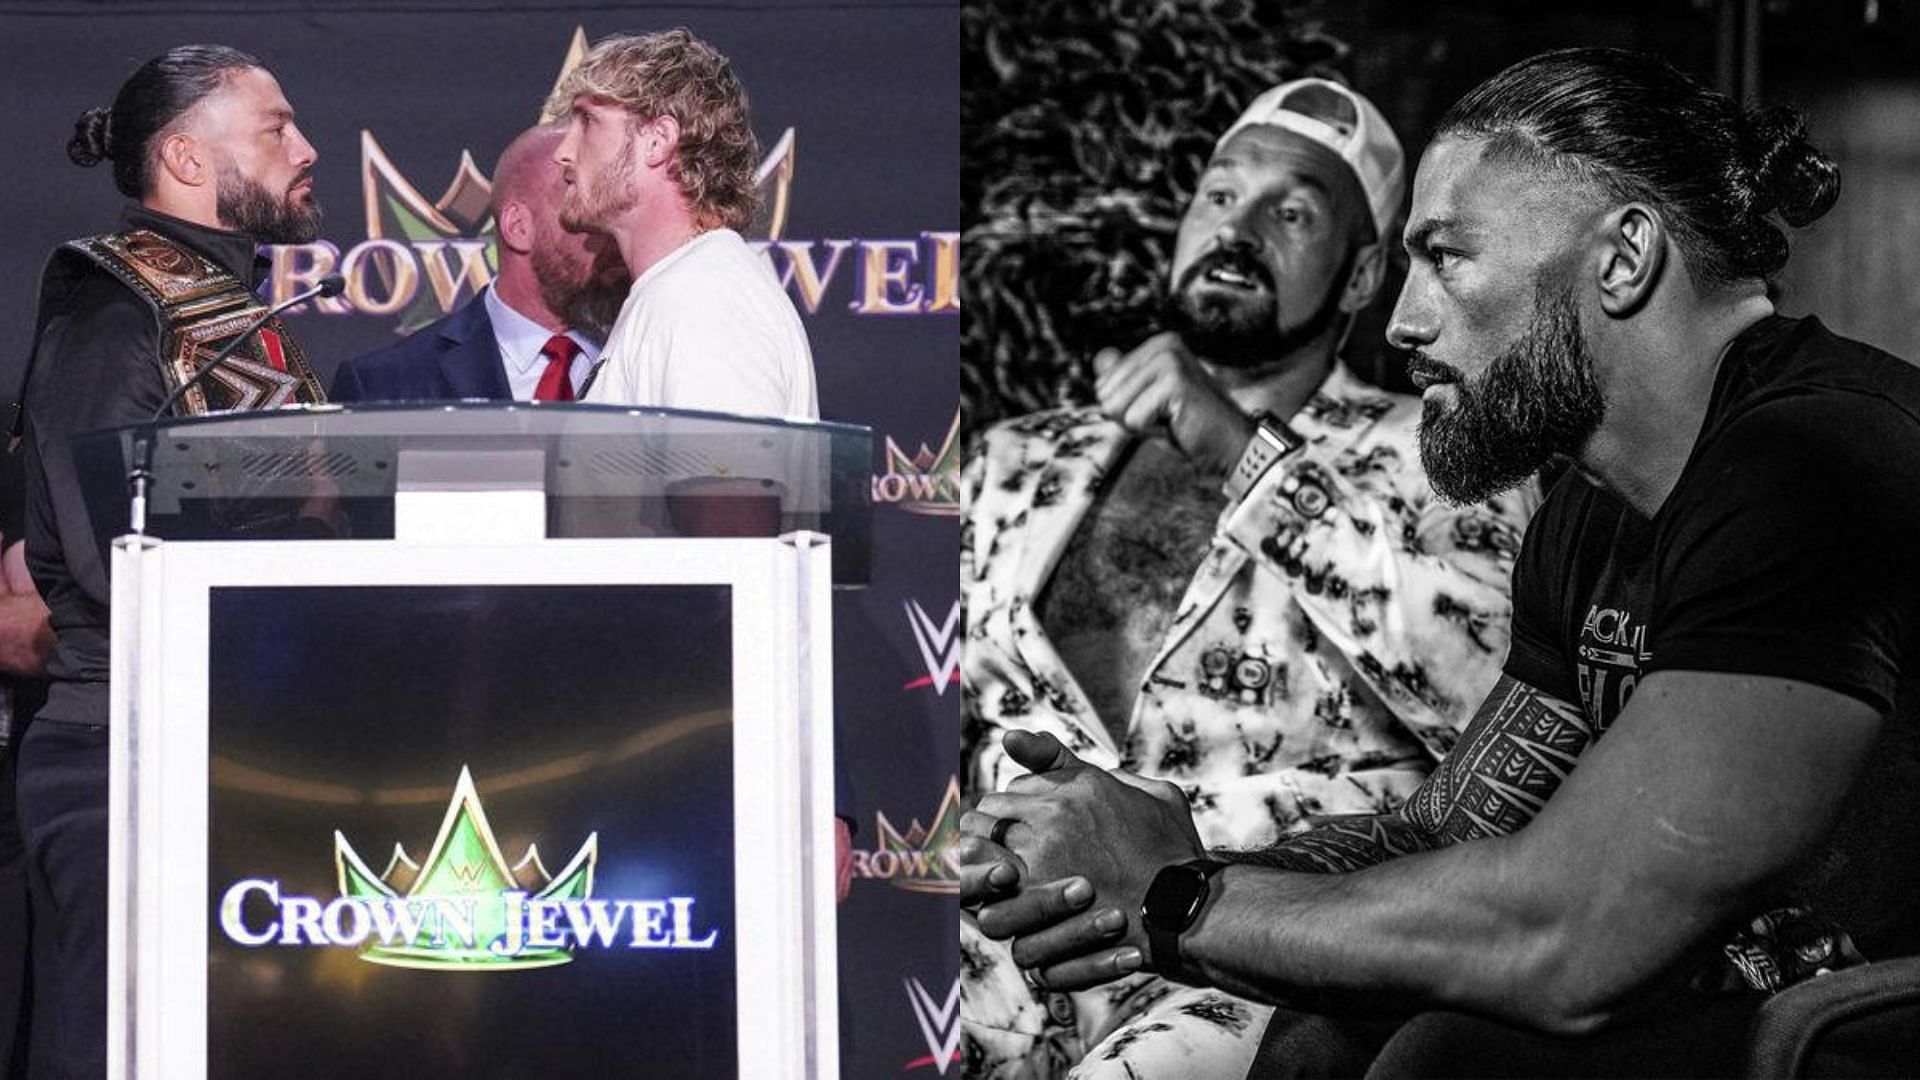 Roman Reigns vs Logan Paul has received mixed reactions from the WWE Universe